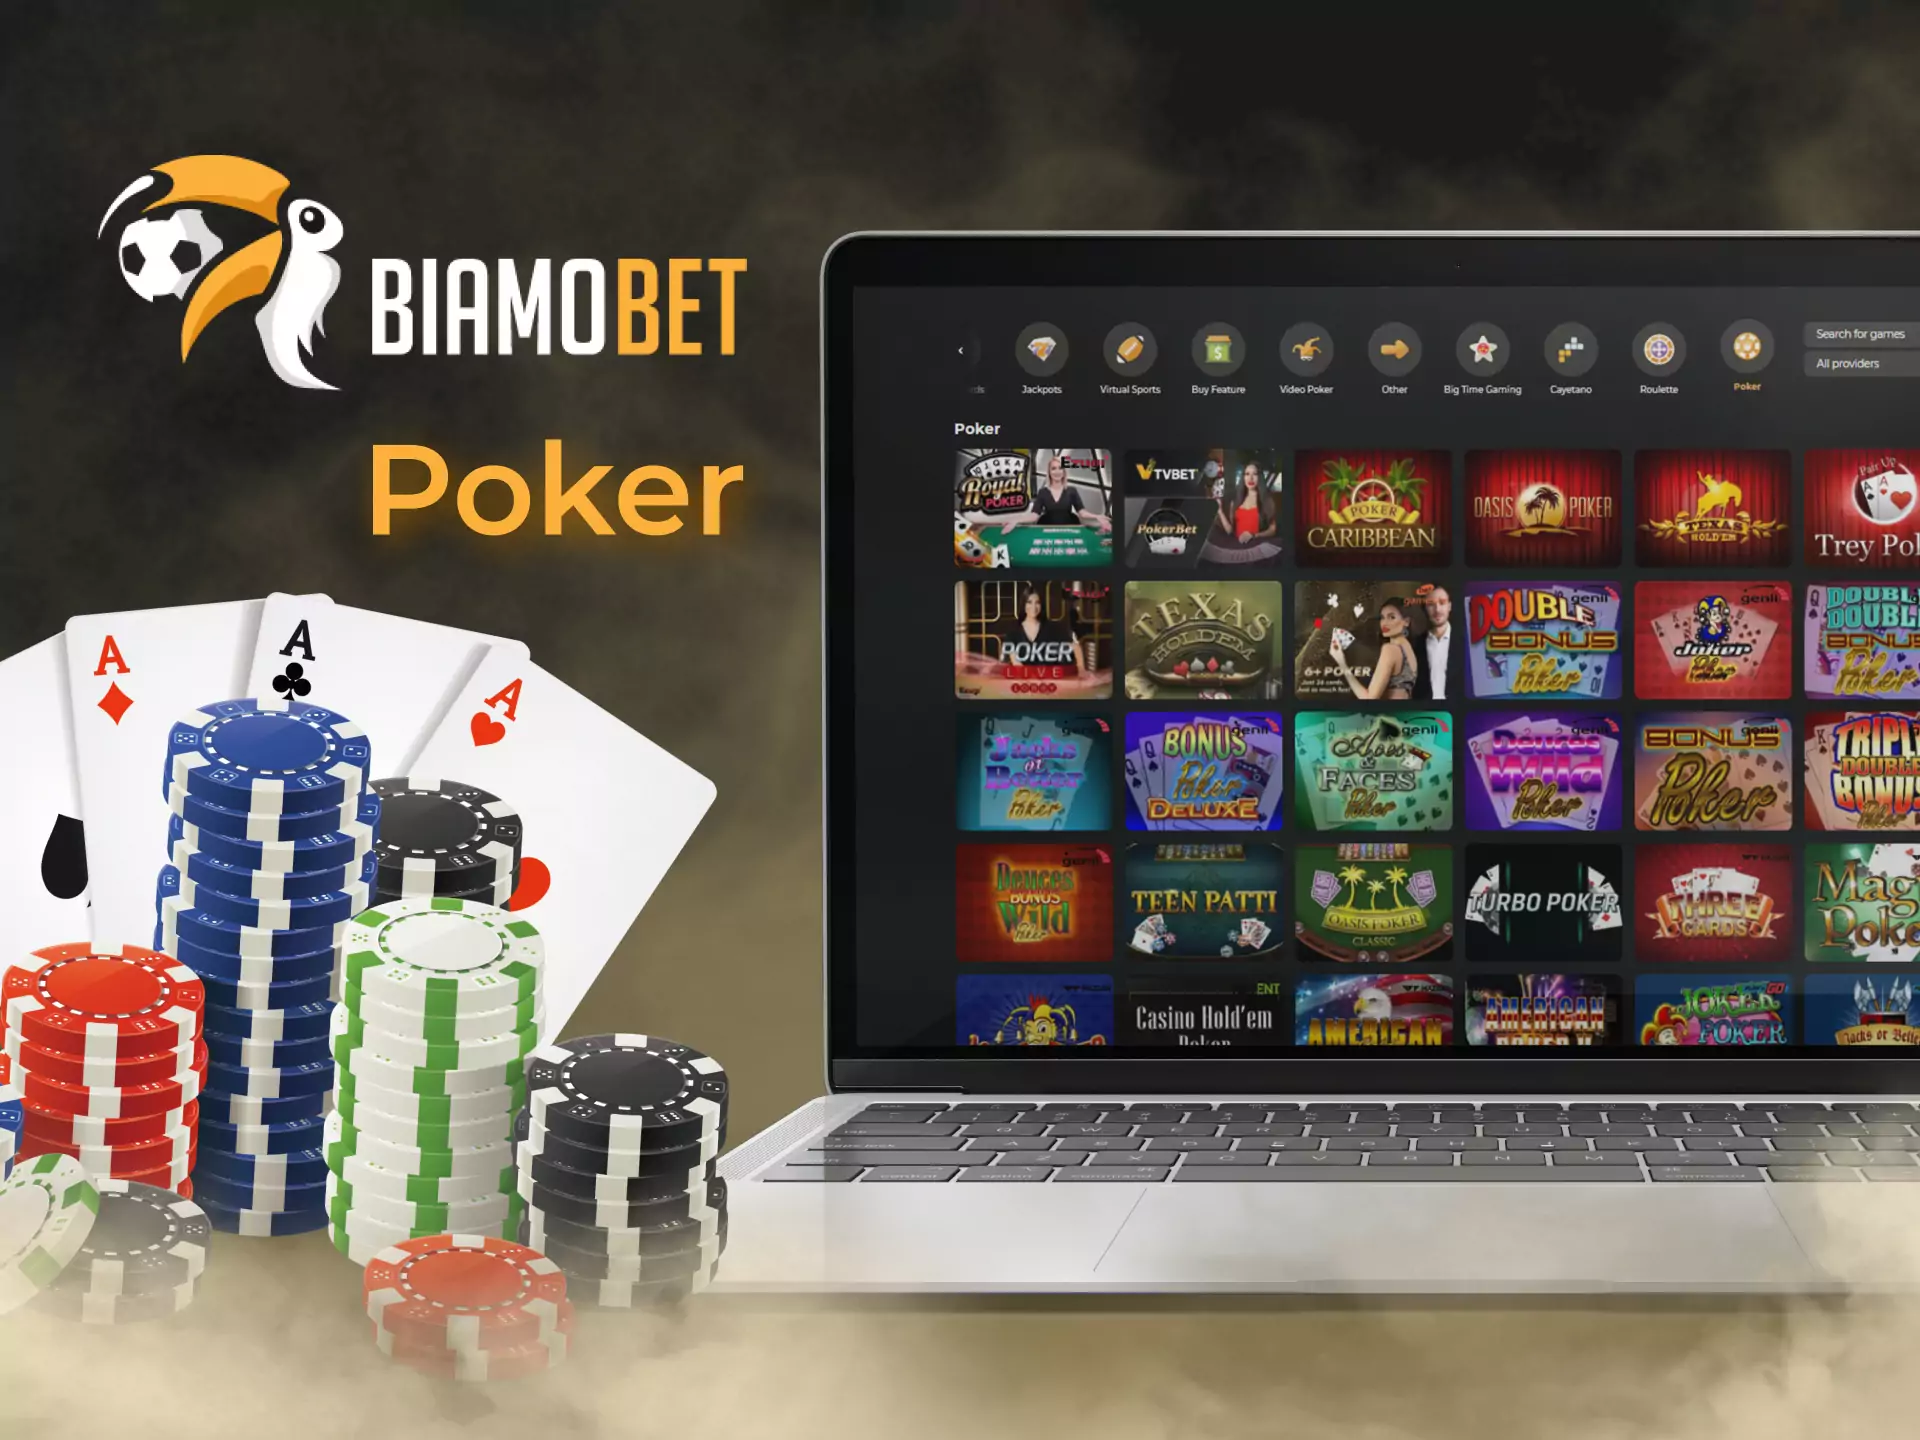 You can play the game of poker in the Biamobet Casino with live dealer.